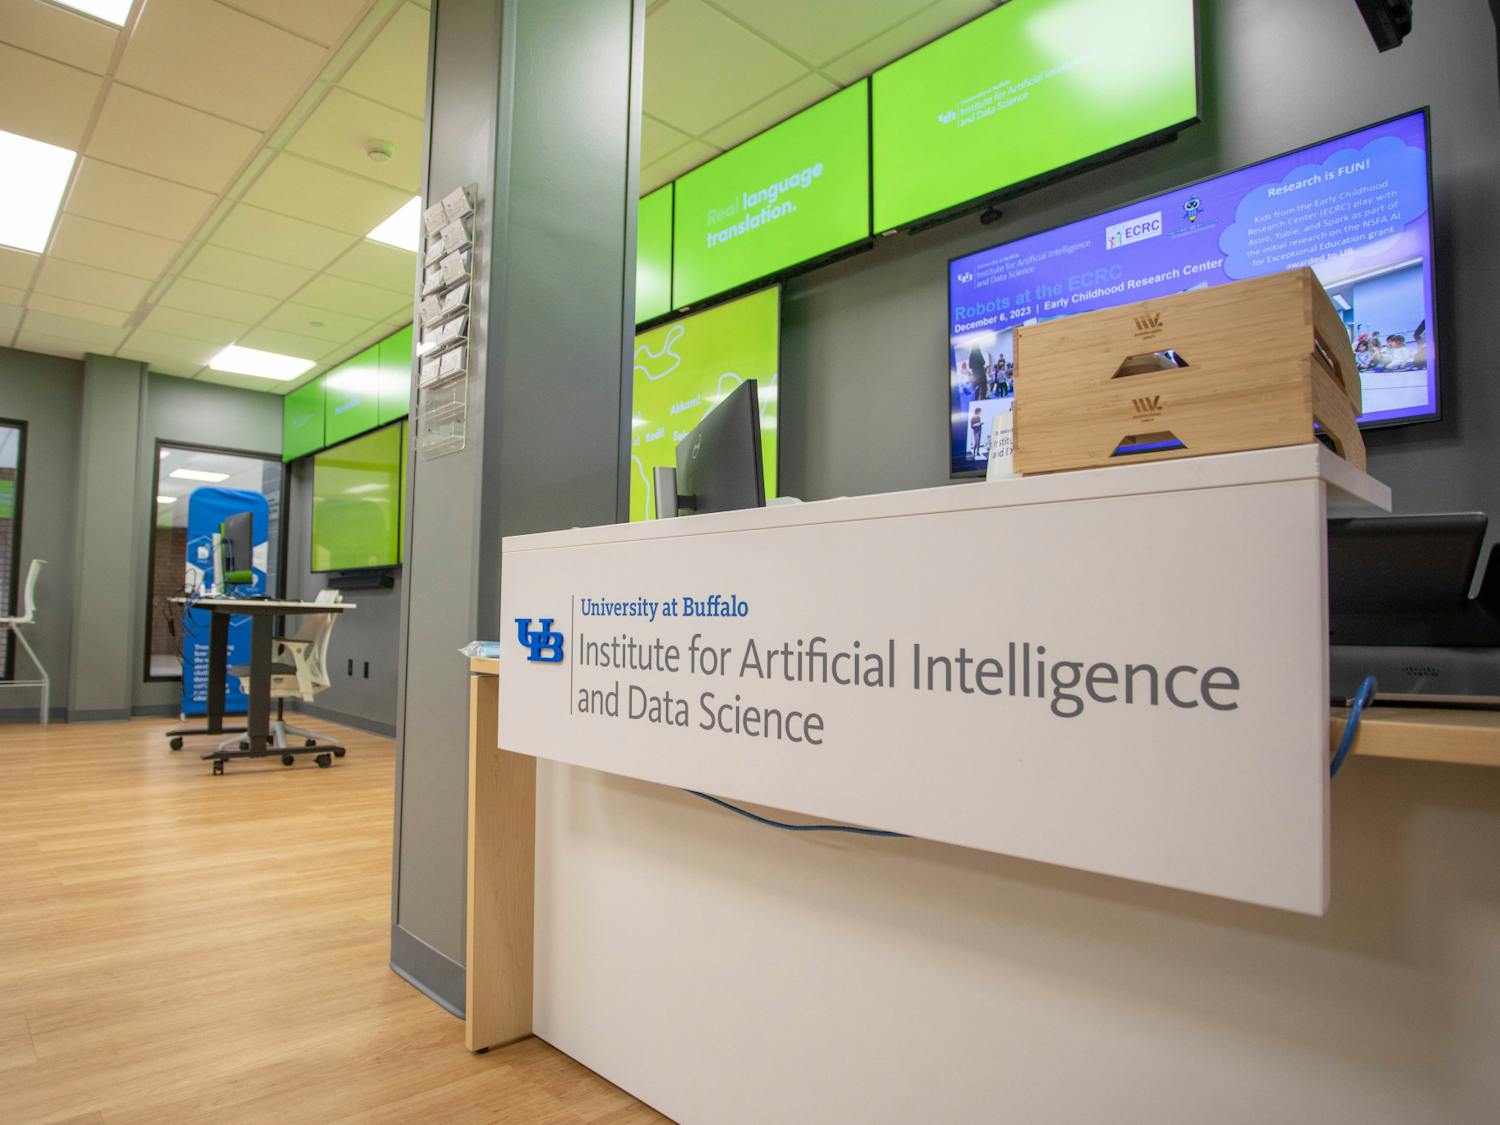 The Institute for Artificial Intelligence and Data Science is located outside of the Lockwood Library and serves to connect AI educators, researchers and students across the university.